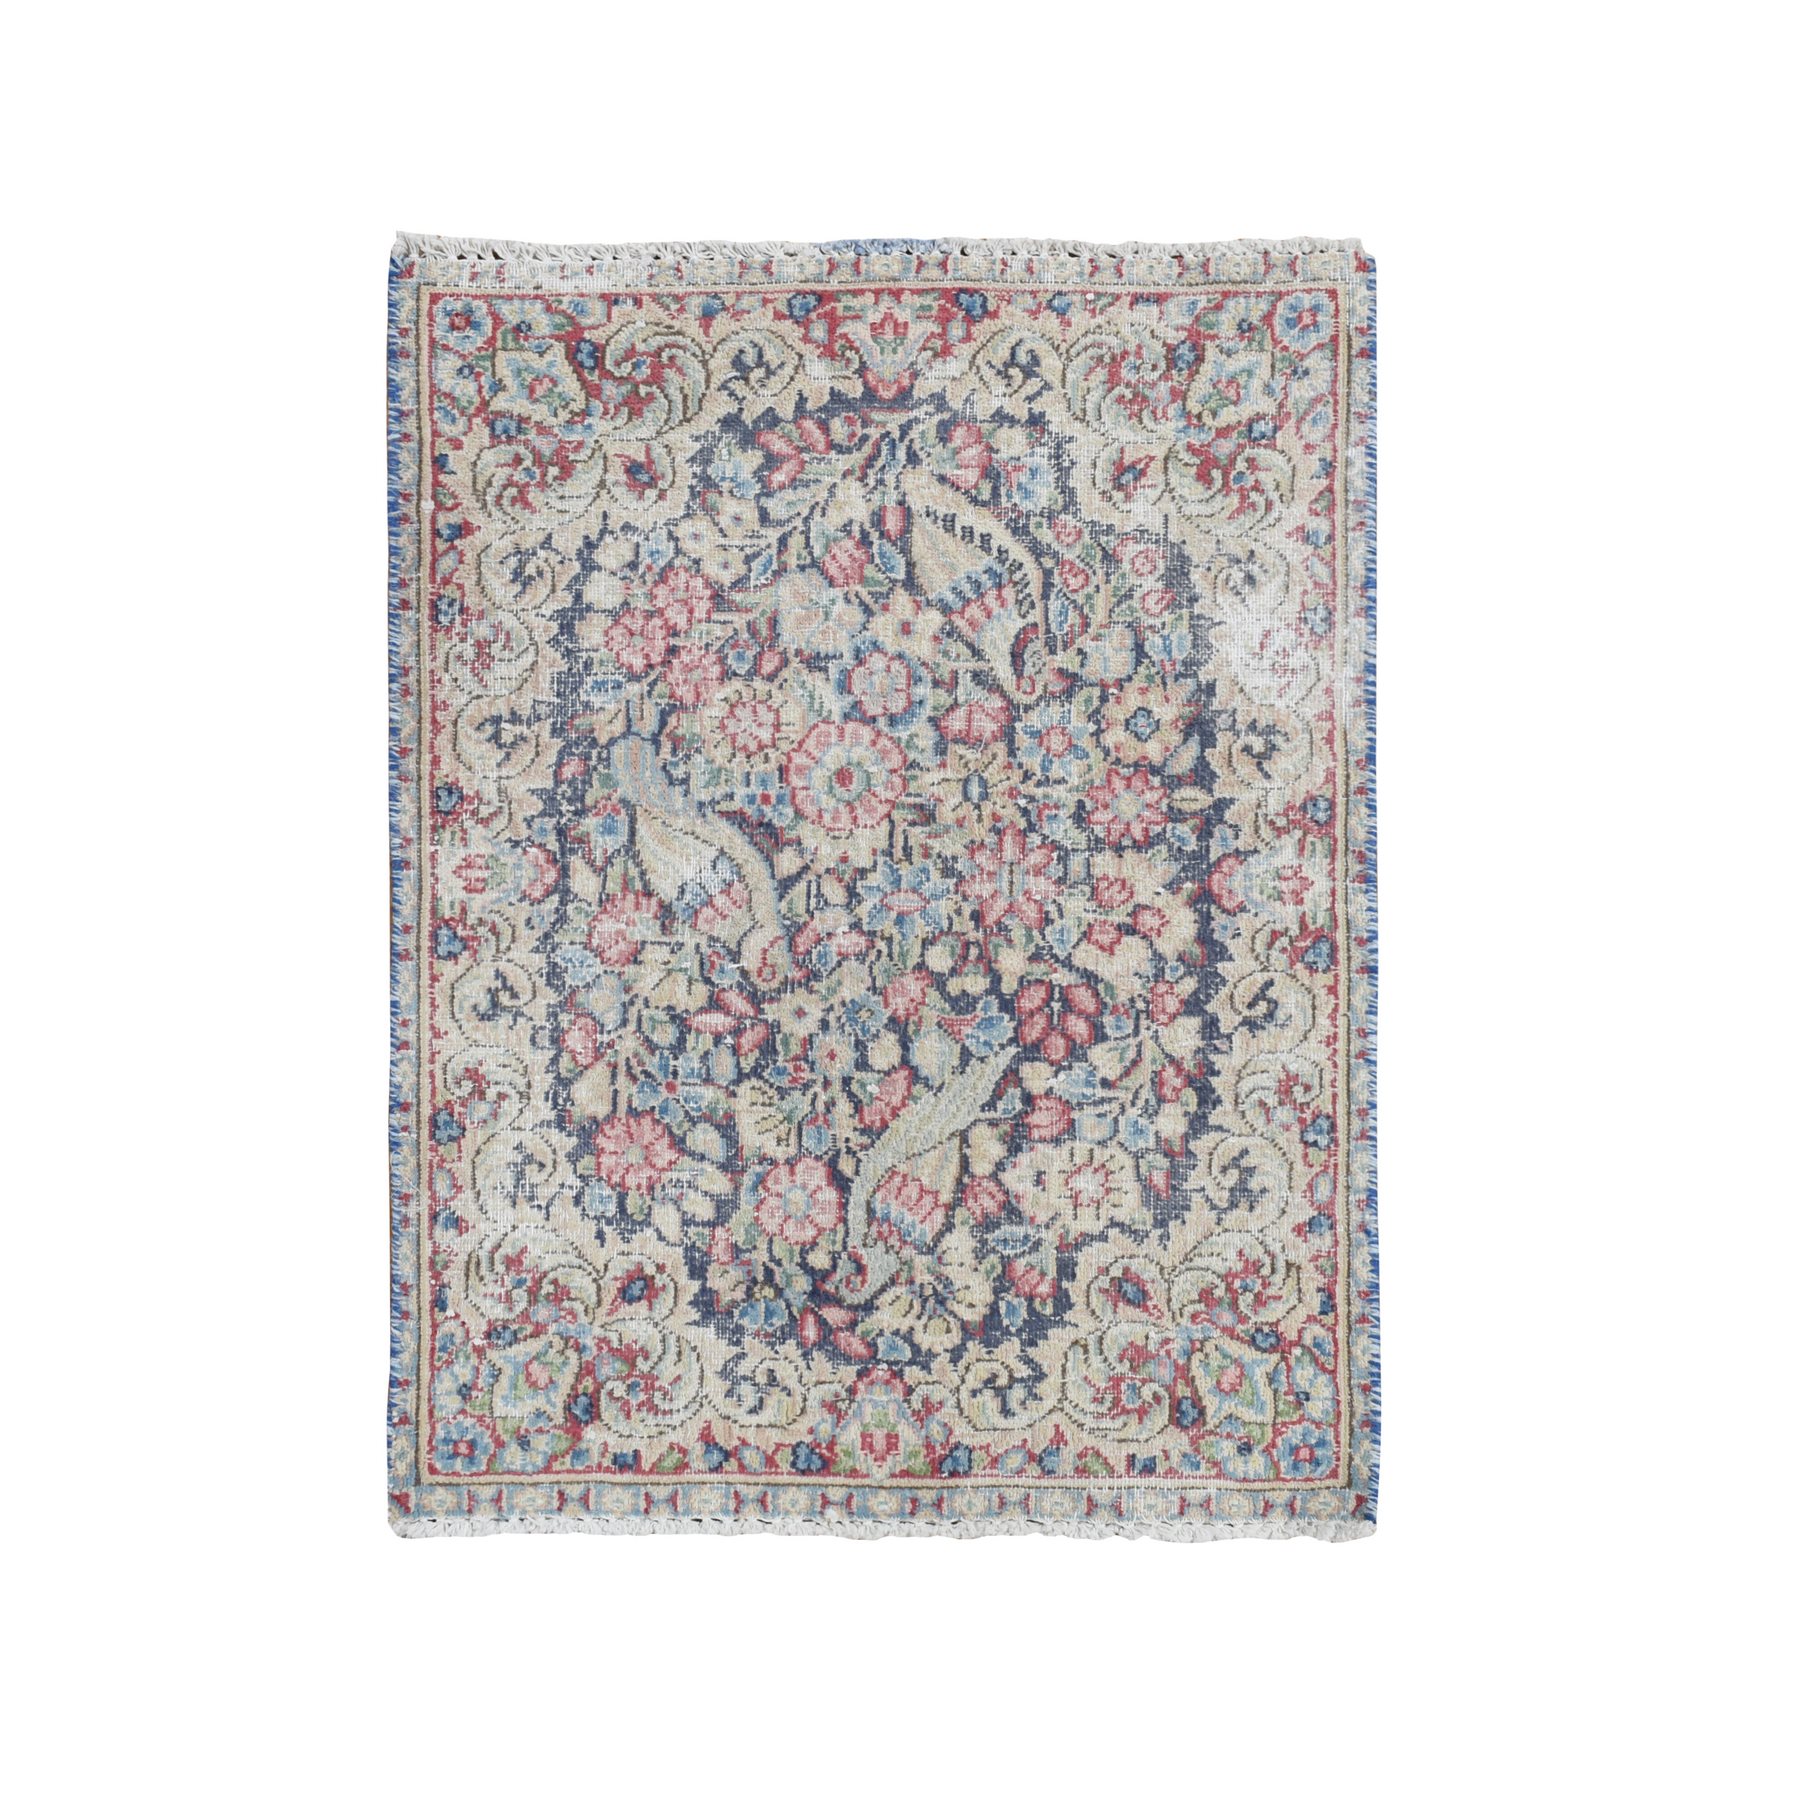  Wool Hand-Knotted Area Rug 1'8